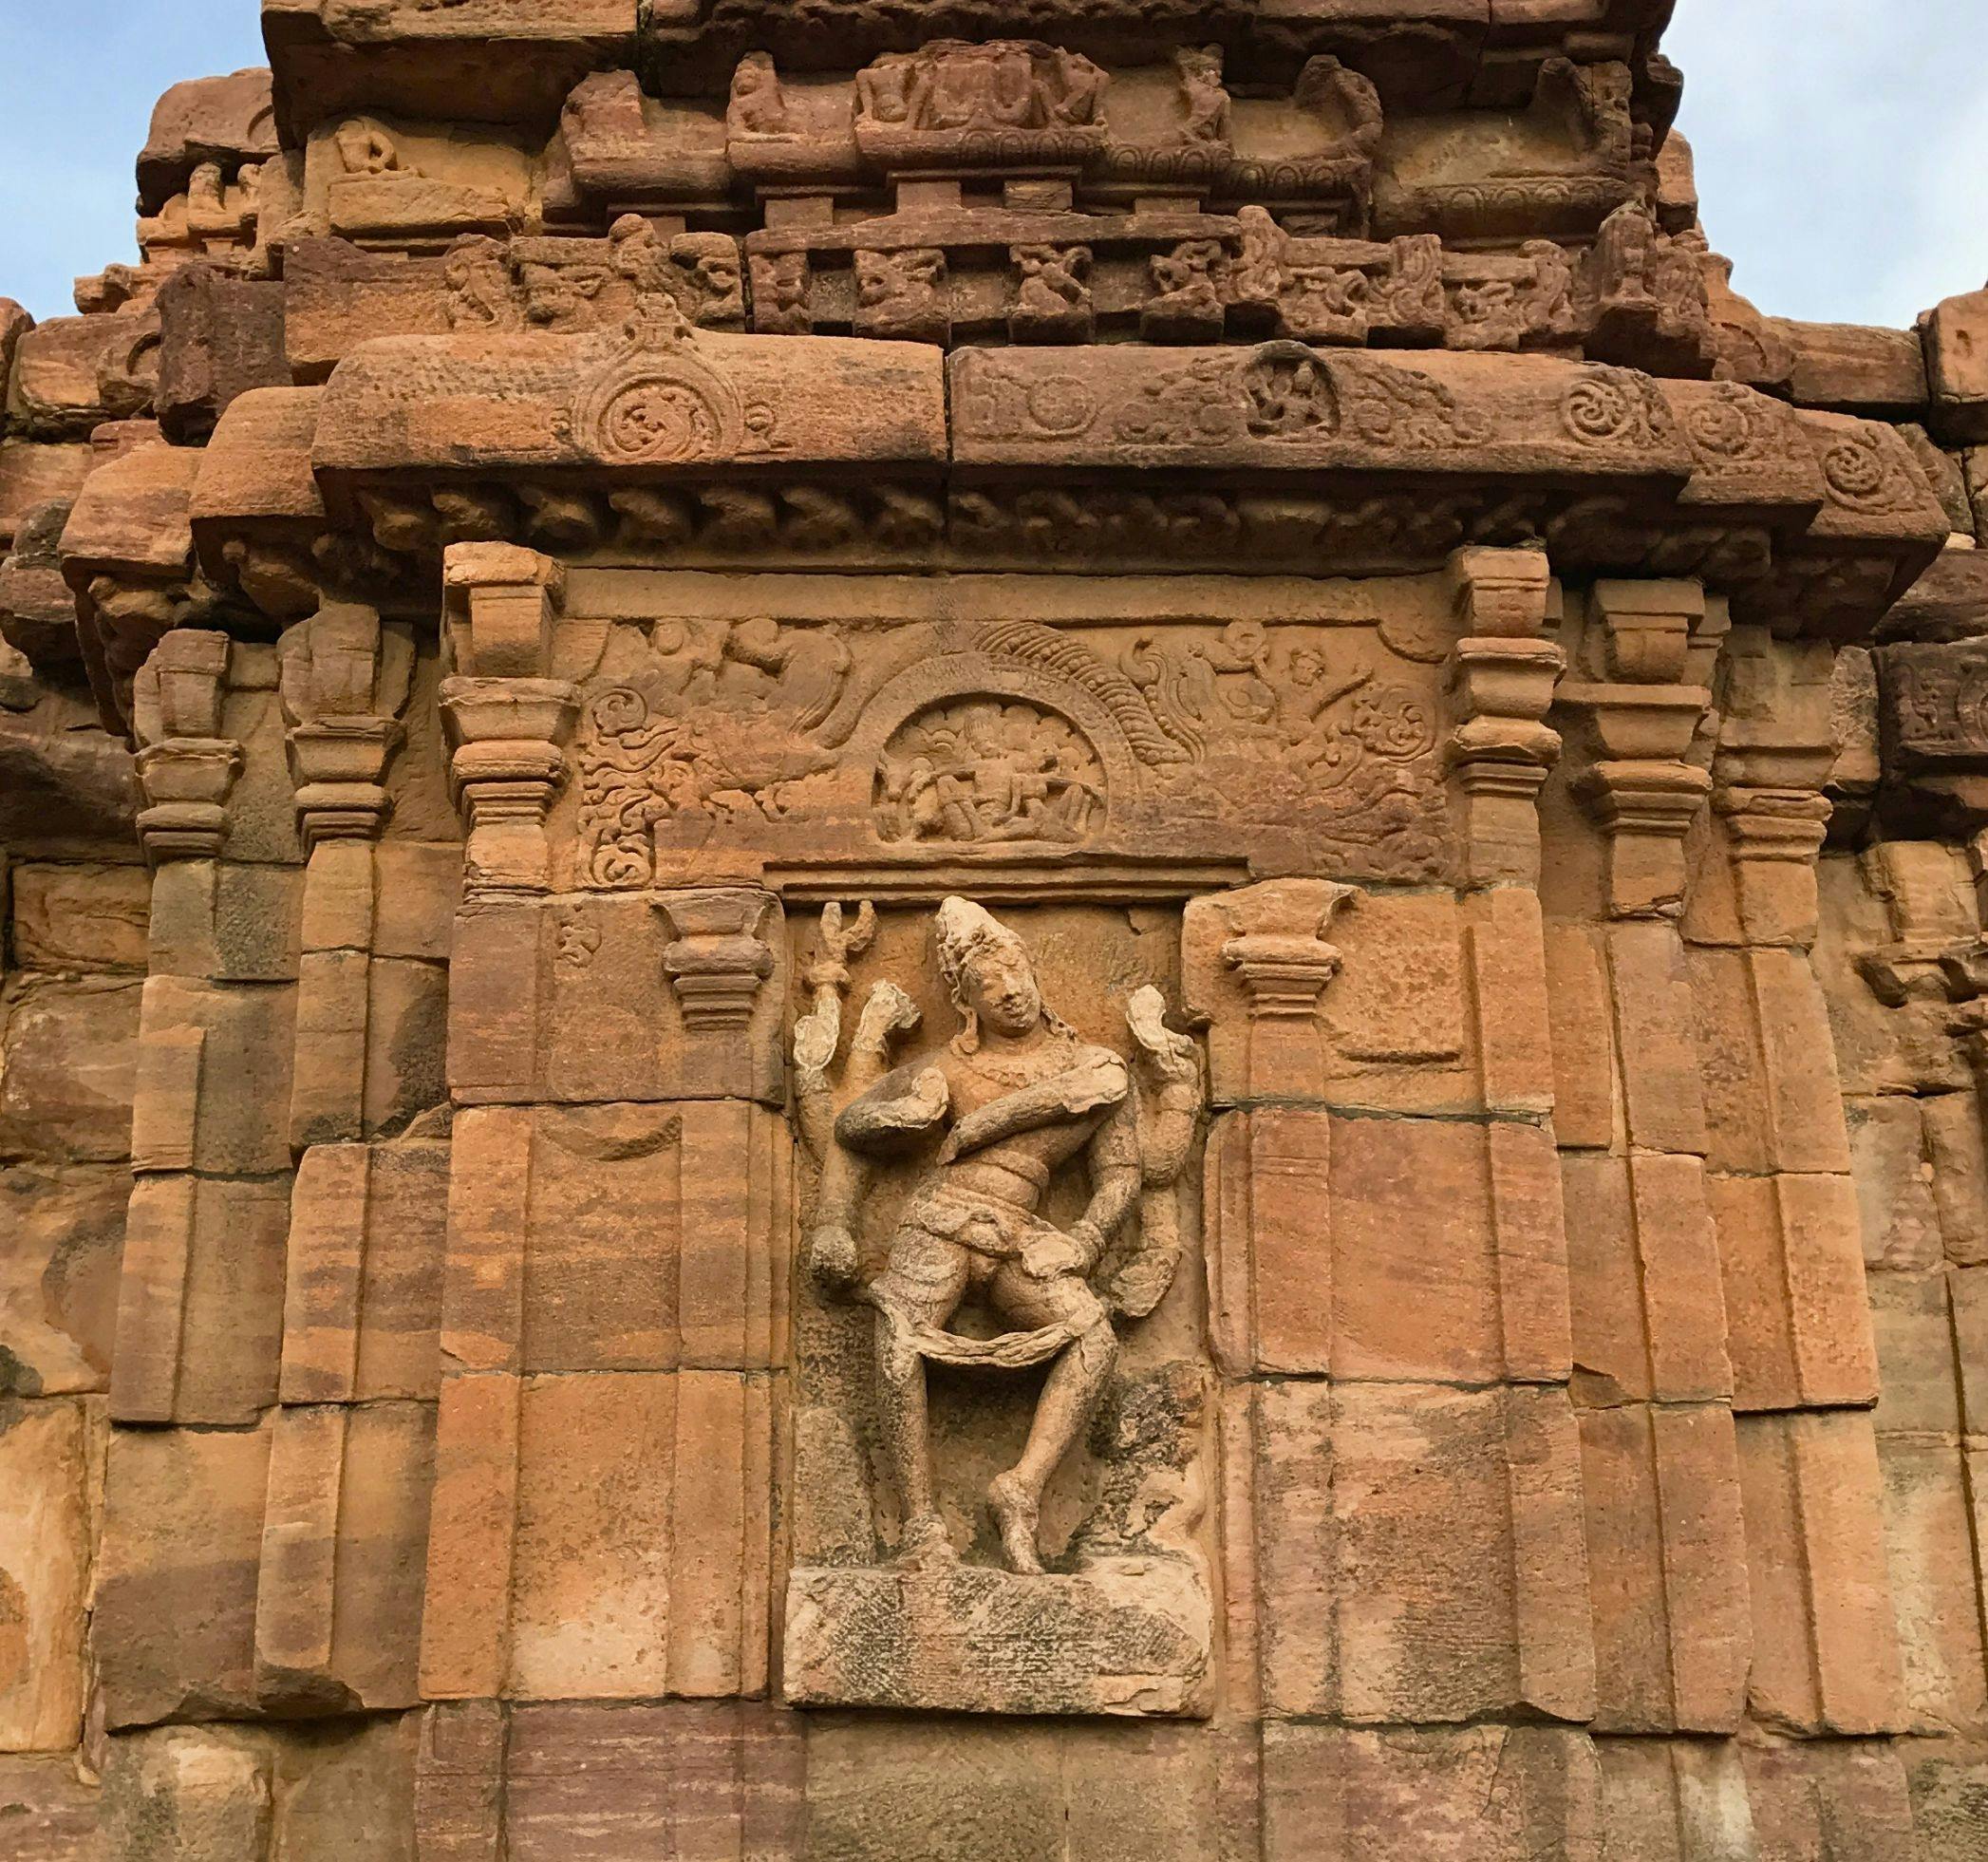 A relief on the wall of Mallikarjuna temple